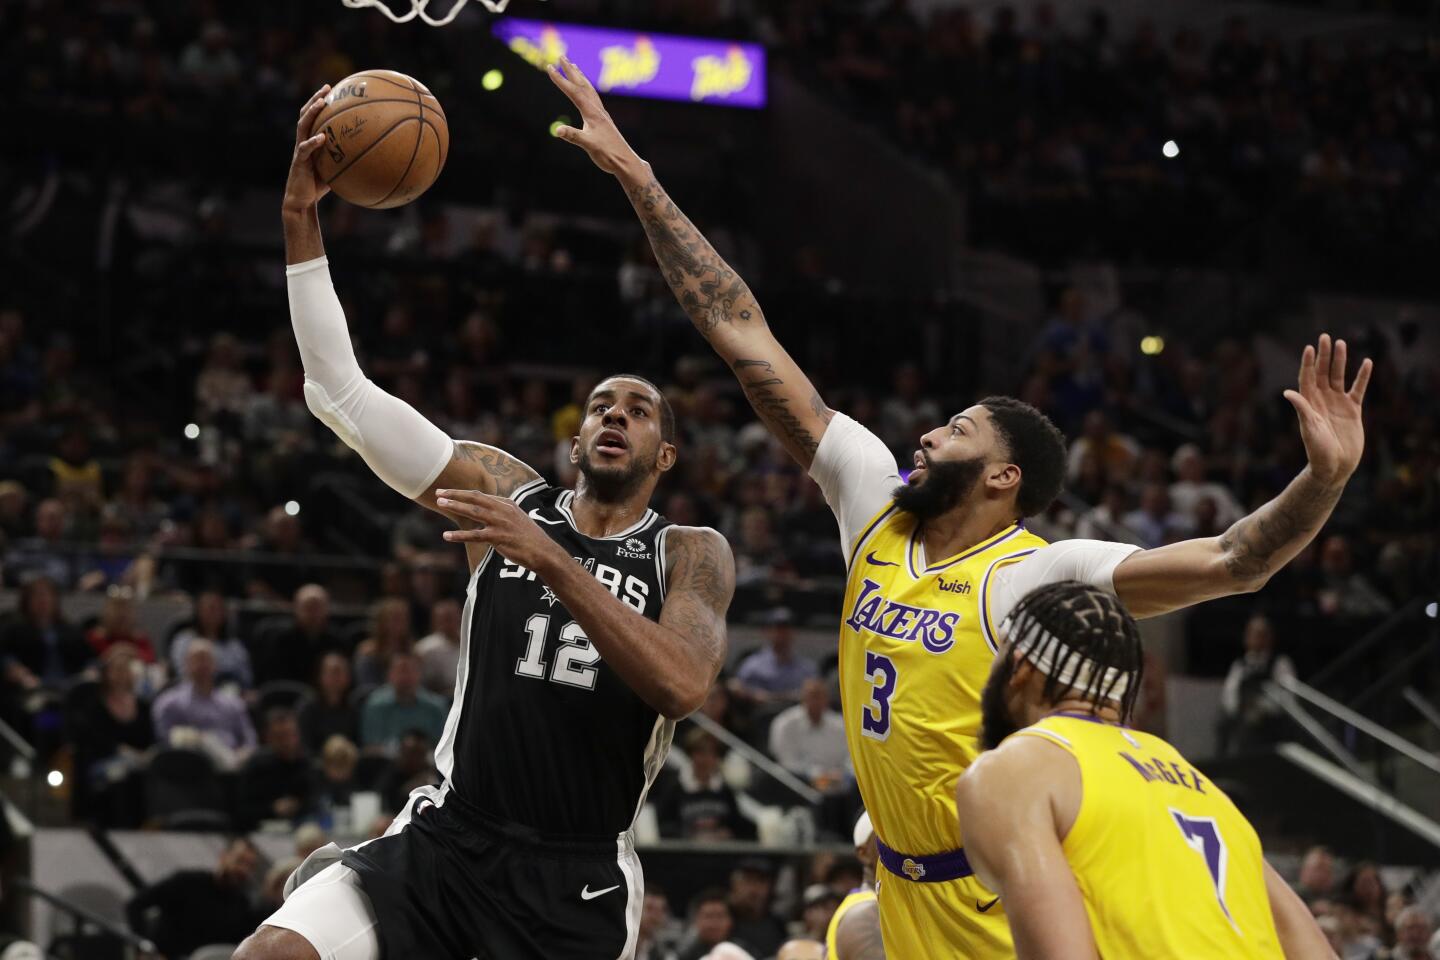 NBA: Spurs win ninth straight game with big victory over Los Angeles Lakers, Basketball News